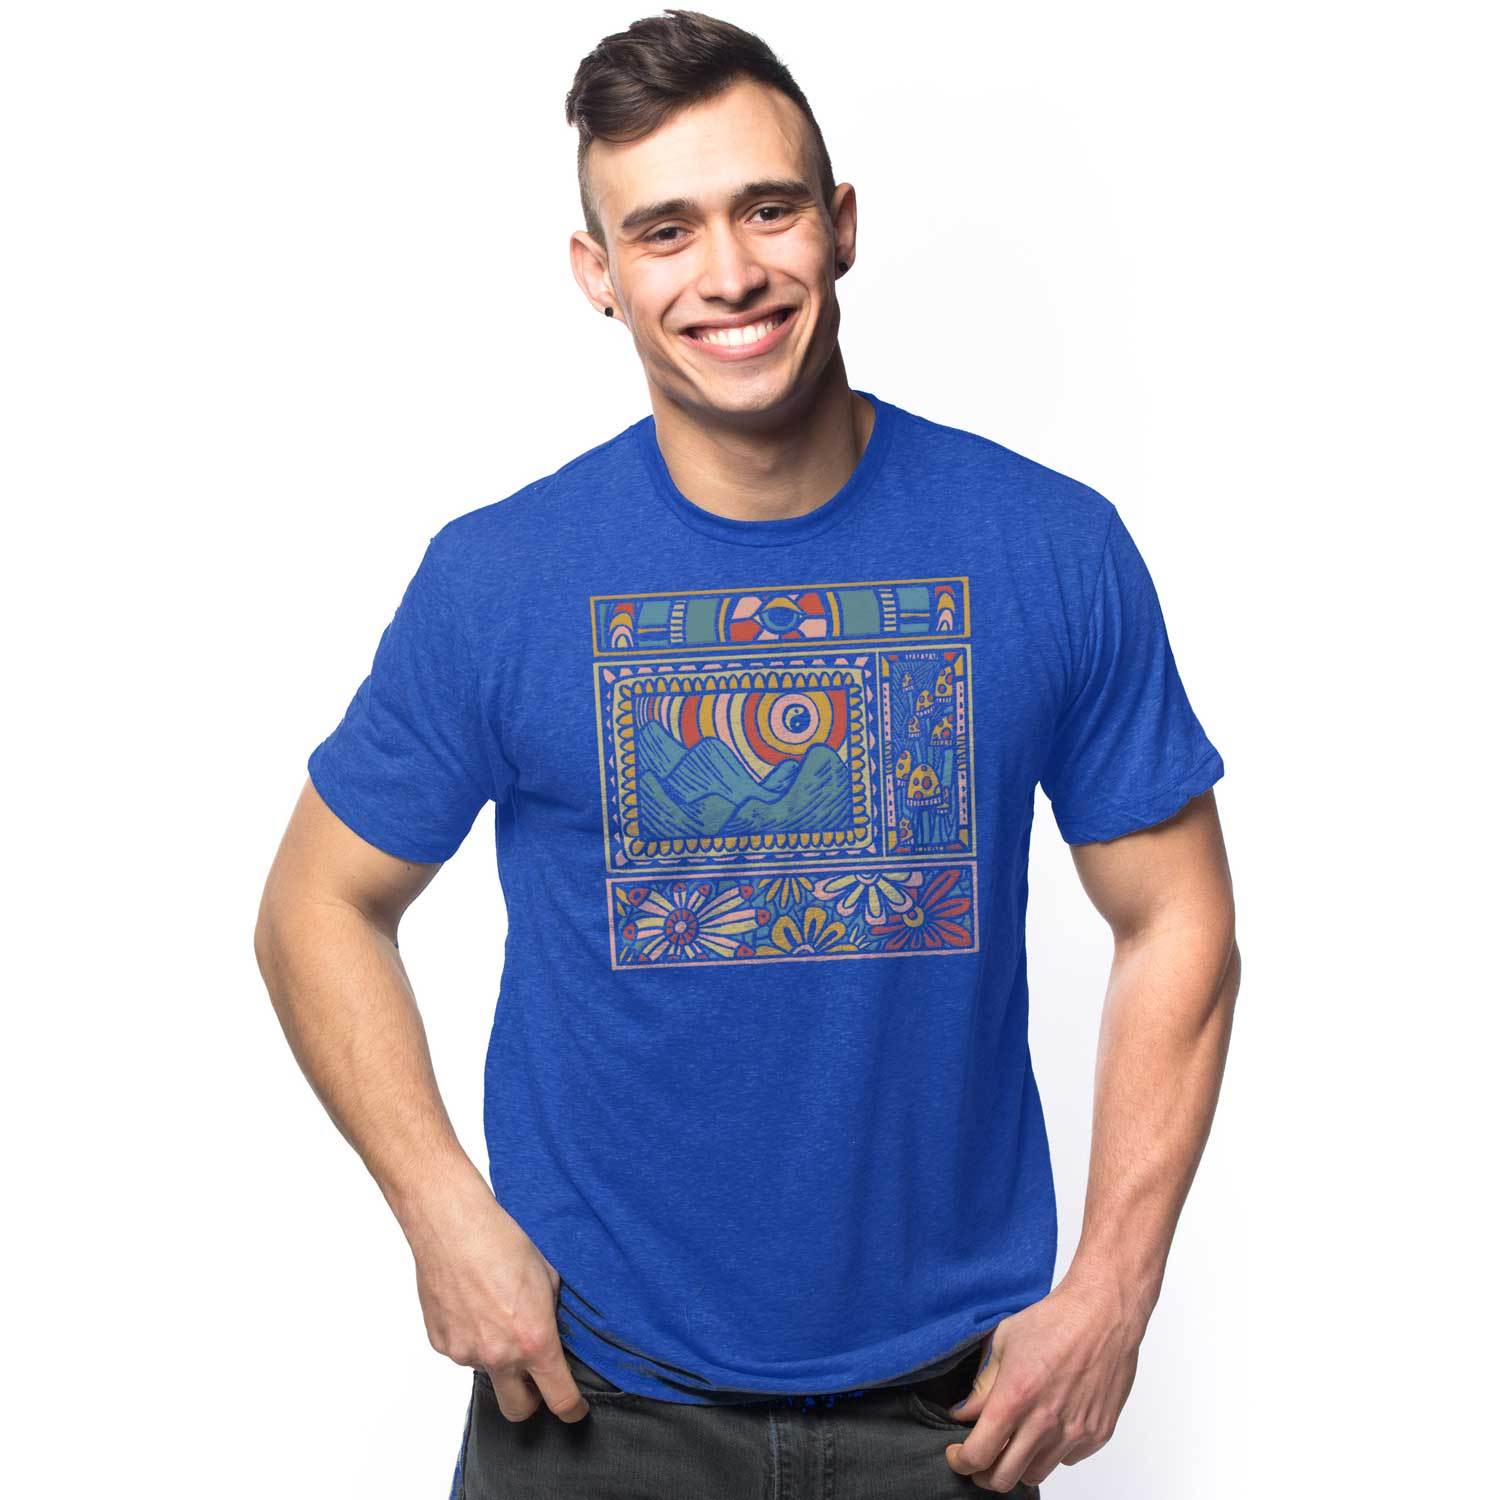 Men's Trippy Nature Retro Mushrooms Graphic Tee | Cool Psychedelic T-Shirt on Model | Solid Threads